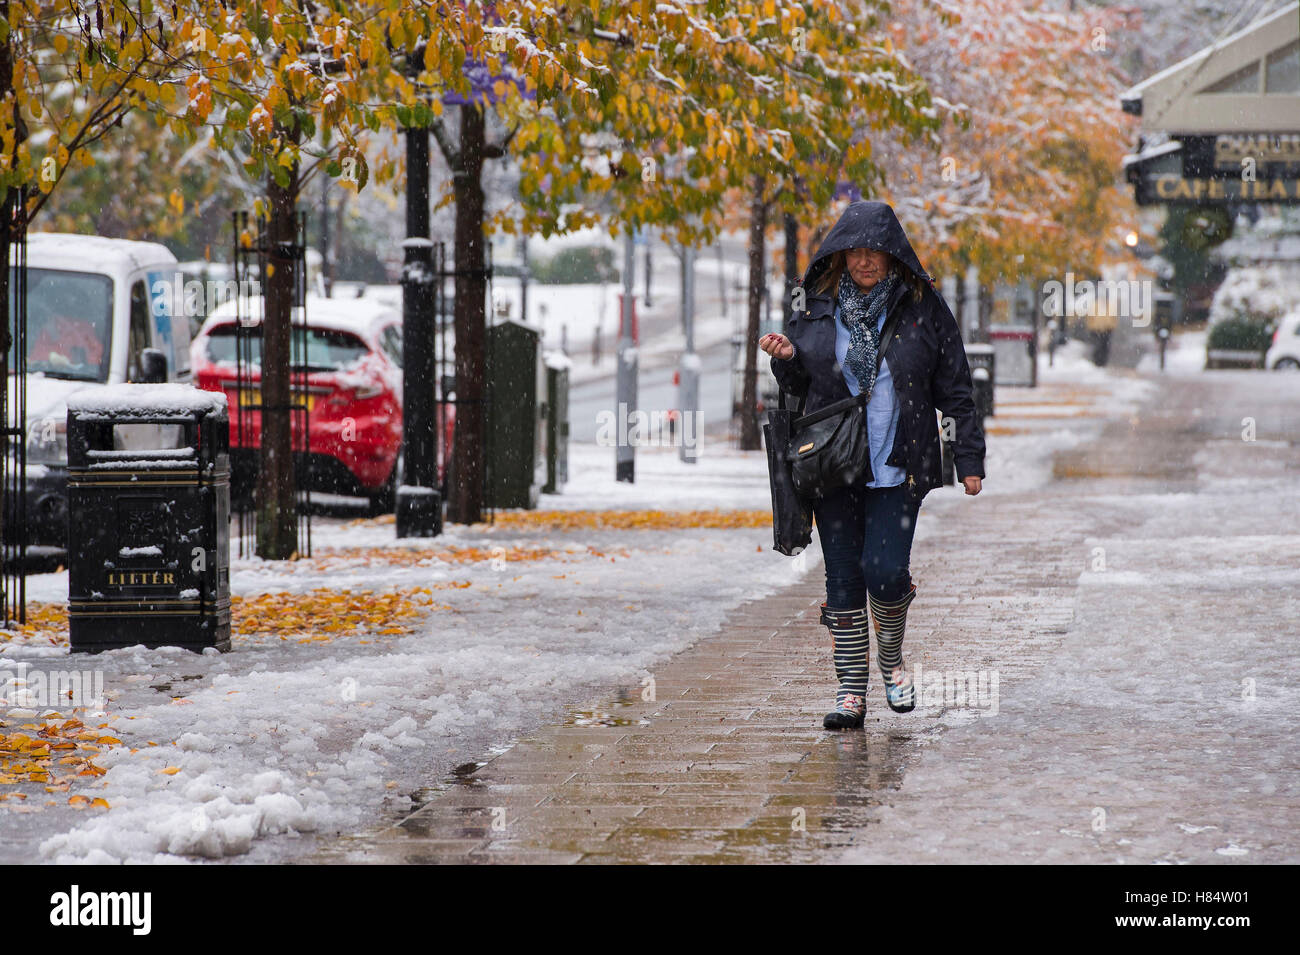 Ilkley, West Yorkshire, UK. 9th November 2016. It is snowing and a lady (wearing boots and a winter coat with hood up) is walking past shops on The Grove - Ilkley's first snowfall of 2016. Credit:  Ian Lamond/Alamy Live News Stock Photo